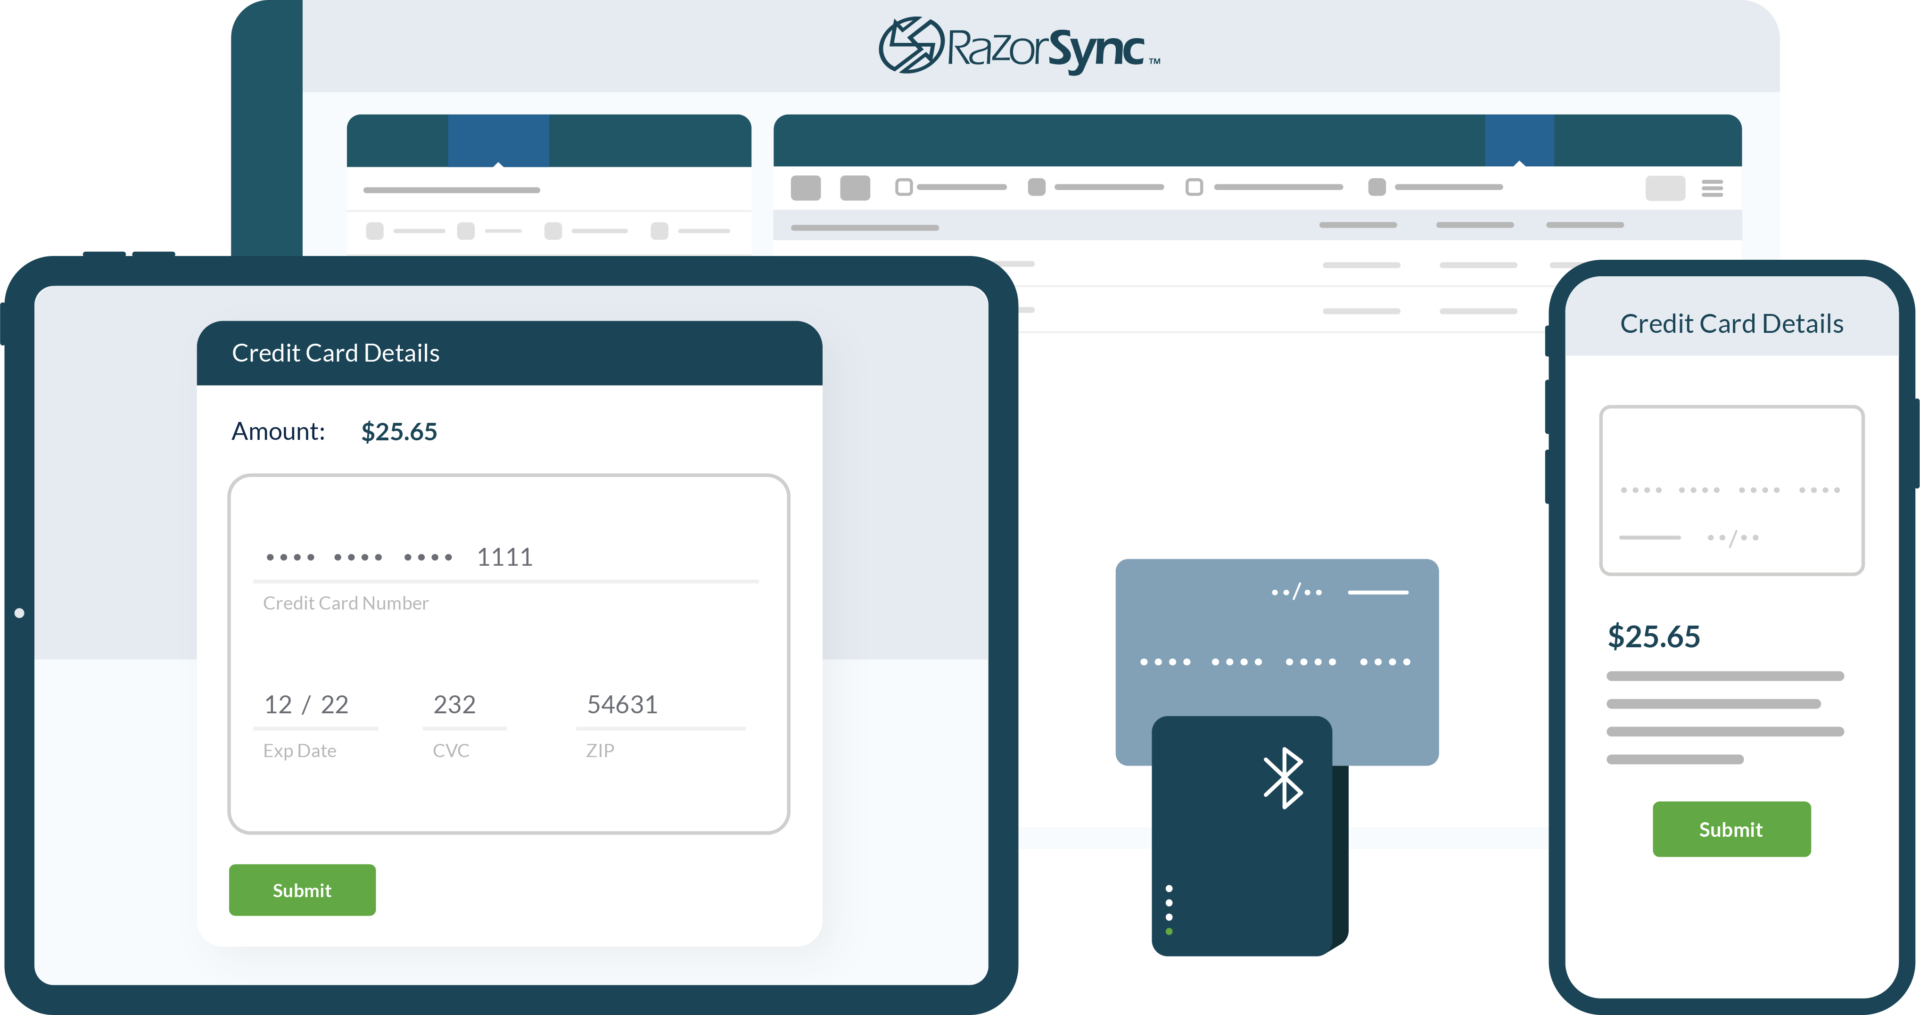 razorsync app screen overview and credit card payment details displayed on computer, tablet, and phone